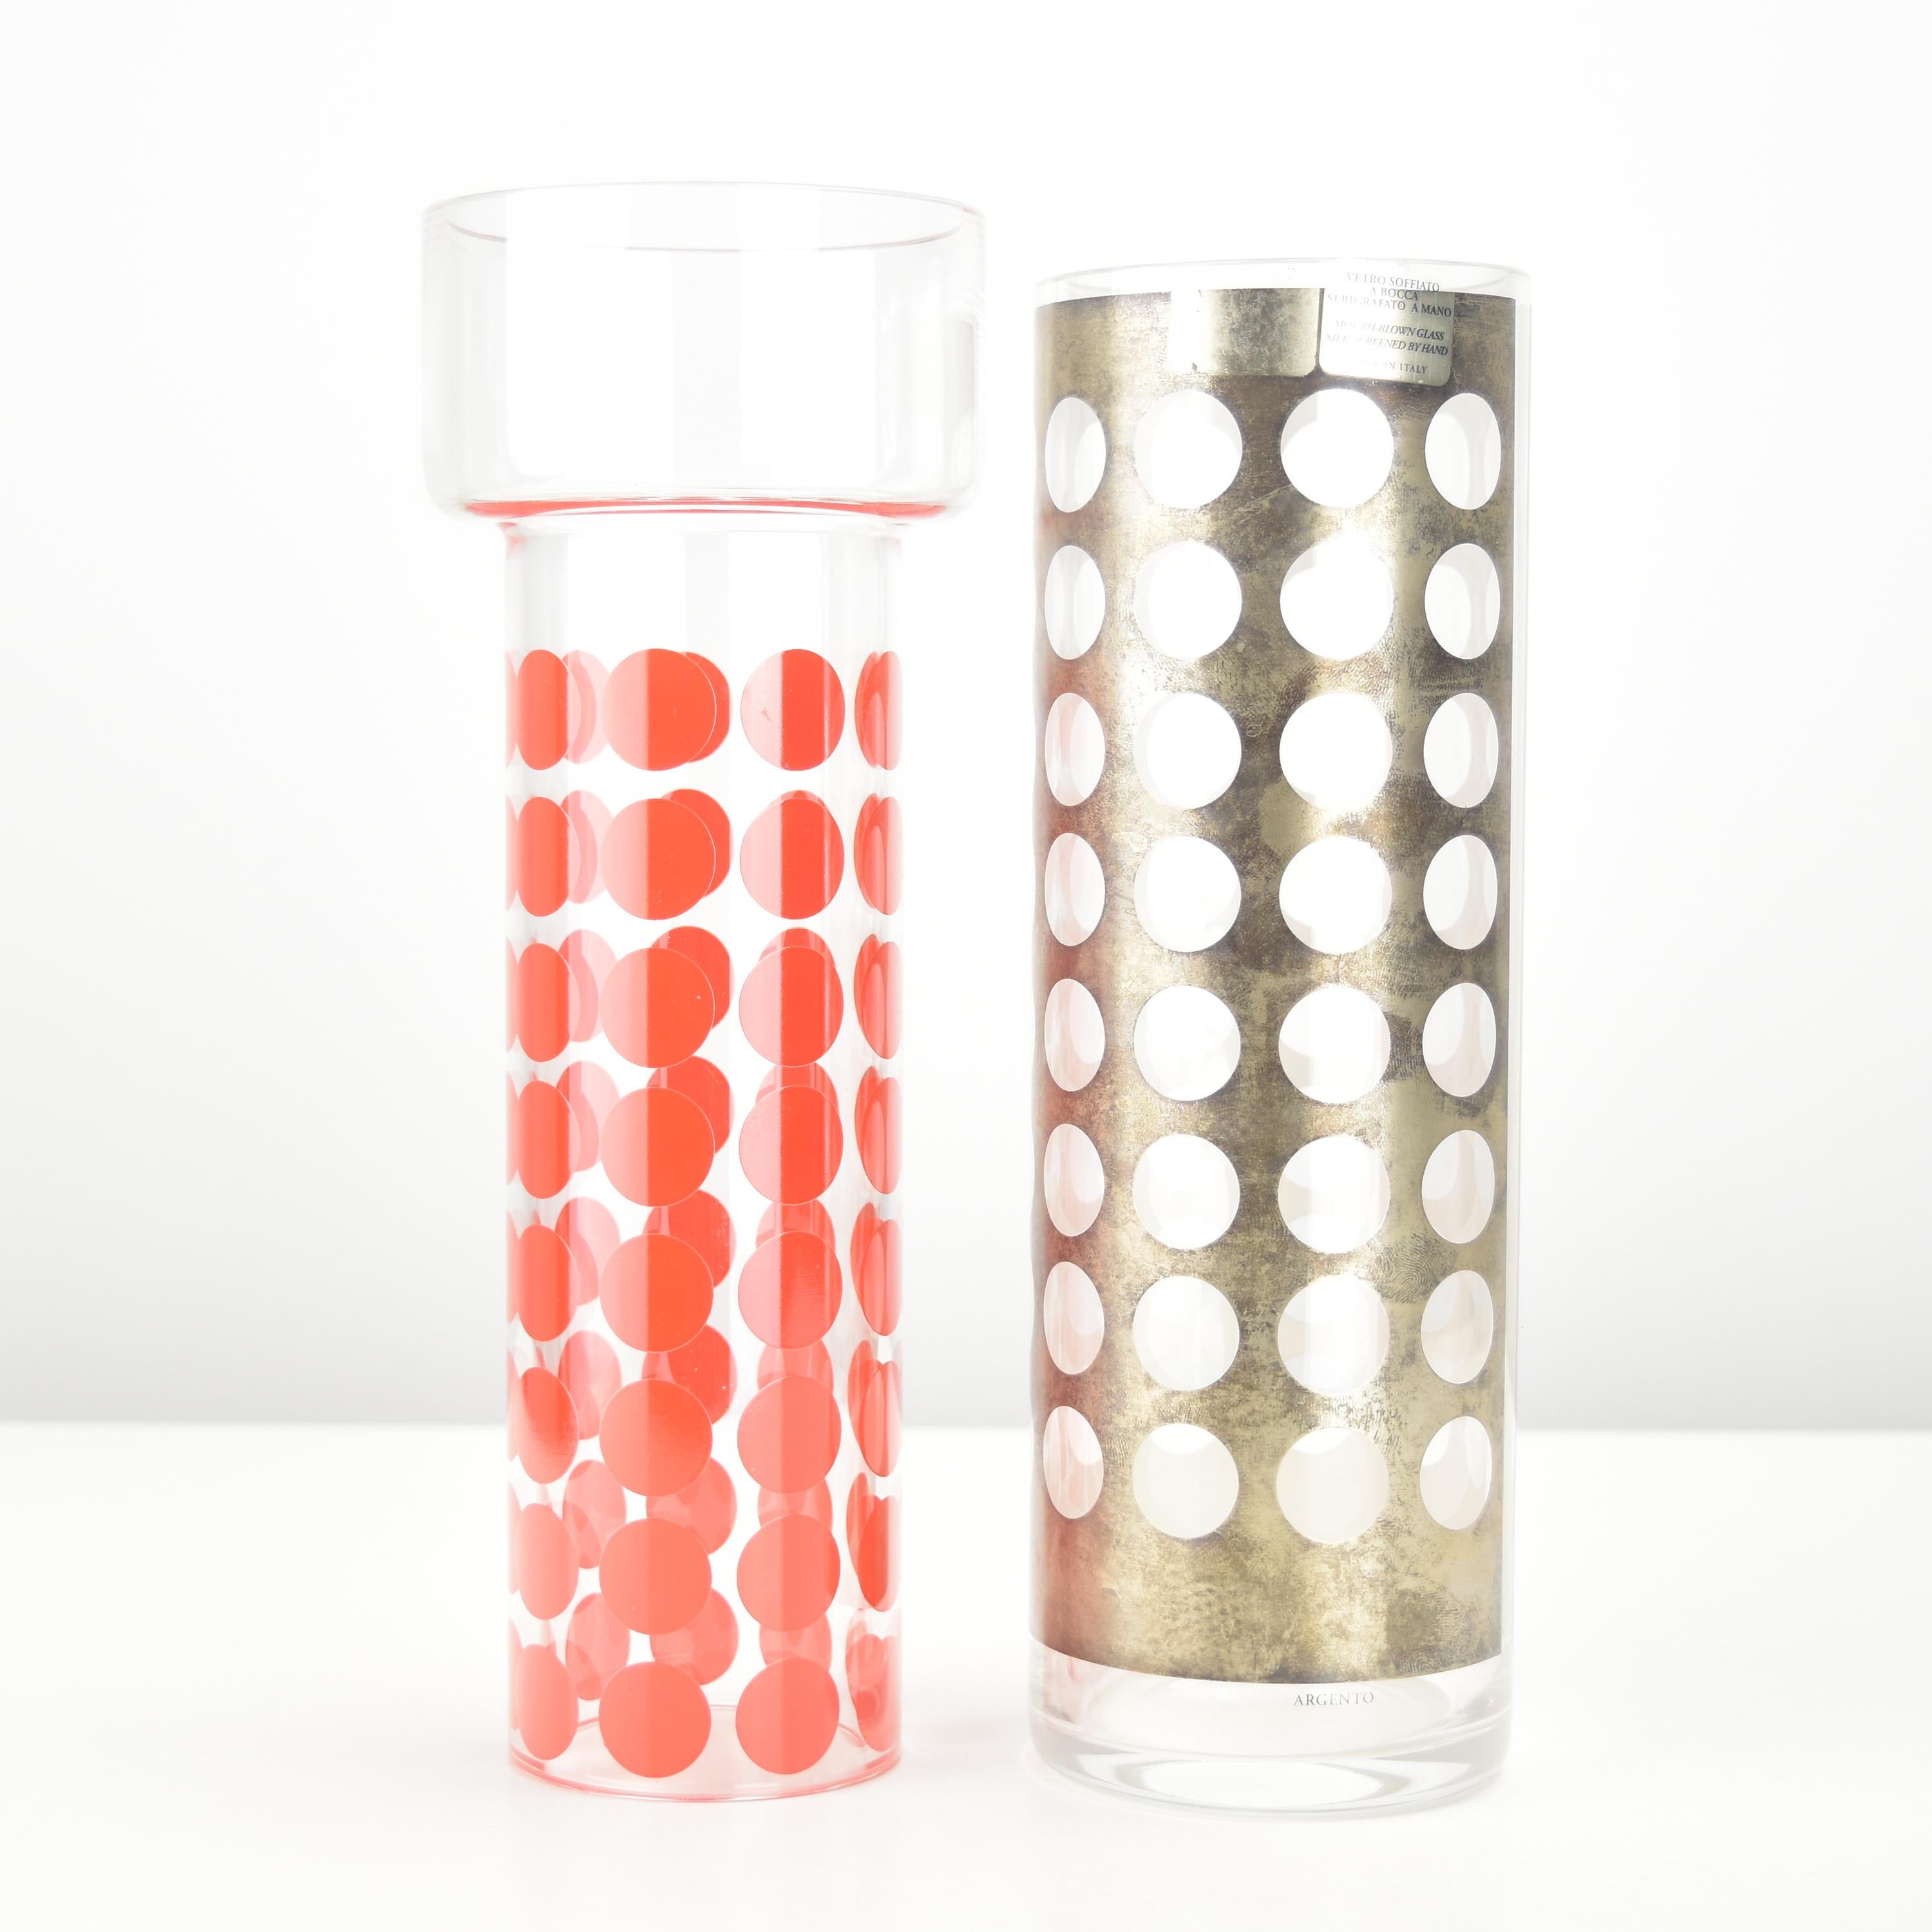 Extremely rare cylindric hyacinth vase with an additional glass liner designed by Manuela and Riccardo Forti when they have been with Sottsass Associati, Milano. Both parts are made of clear glass, the outer vase is decoreated with an sterling